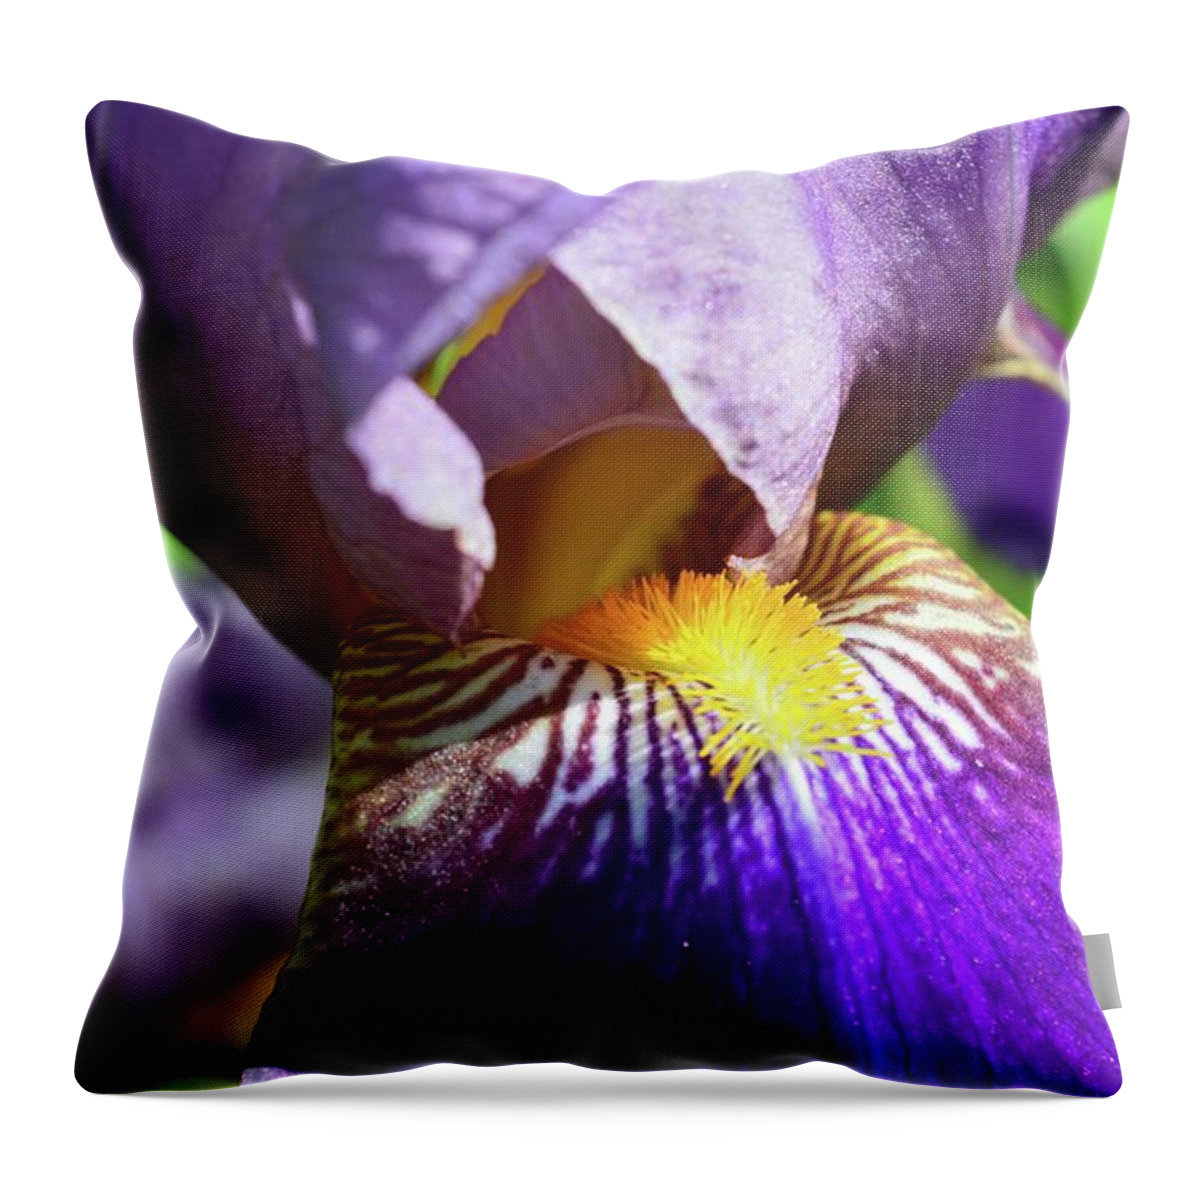 Abstract Throw Pillow featuring the photograph In The Purple Iris by Lyle Crump